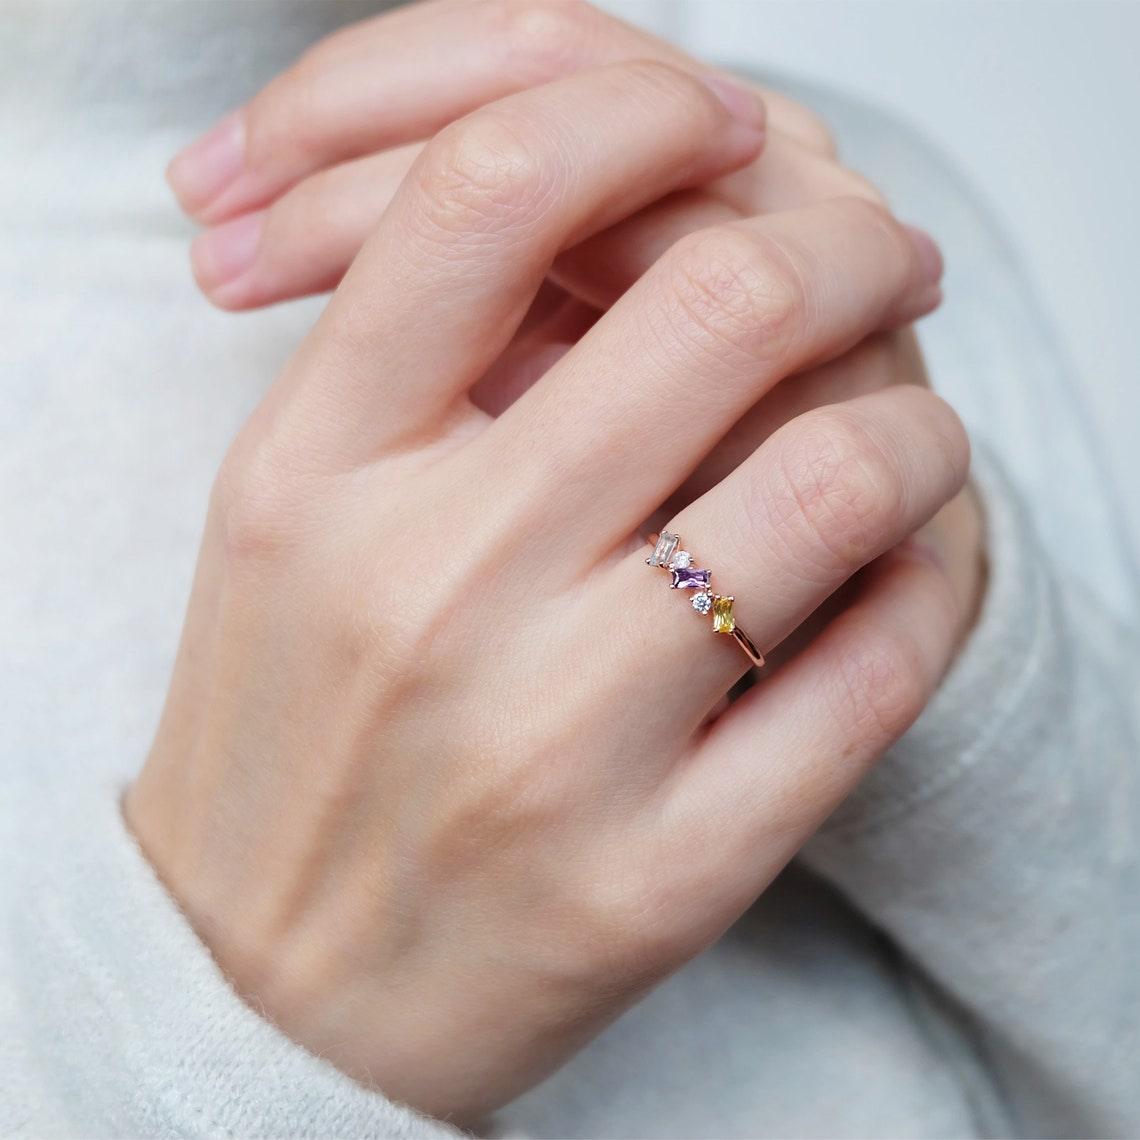 Ring on woman's hand 